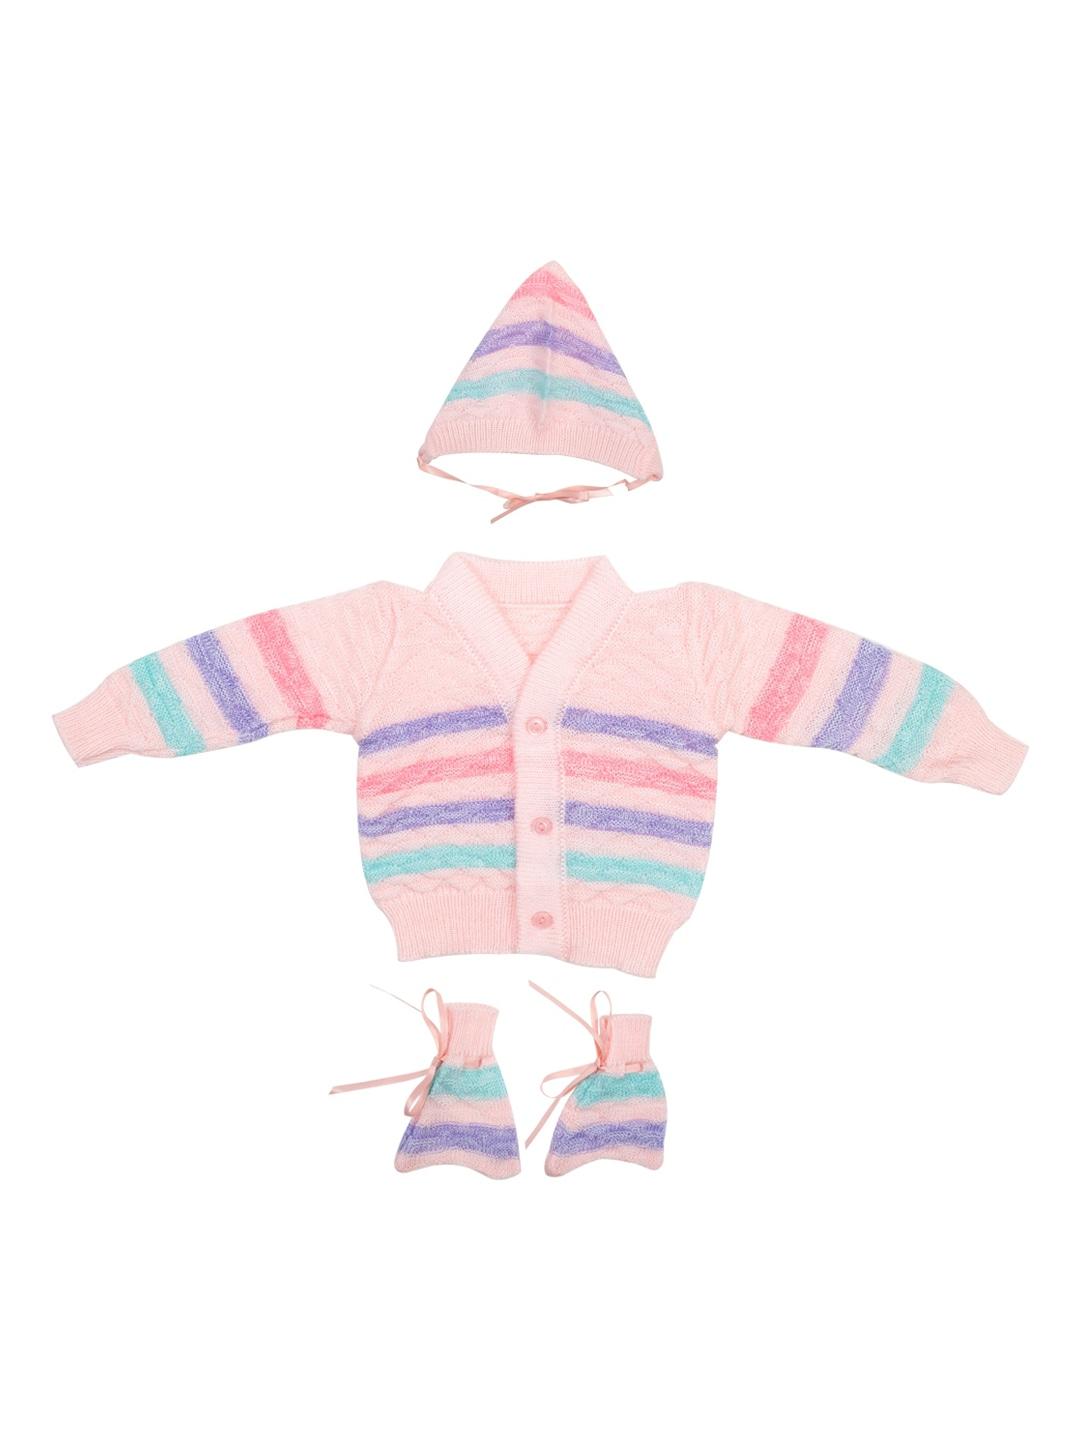 meemee-unisex-kids-pink-striped-sweater-with-beanie-and-socks